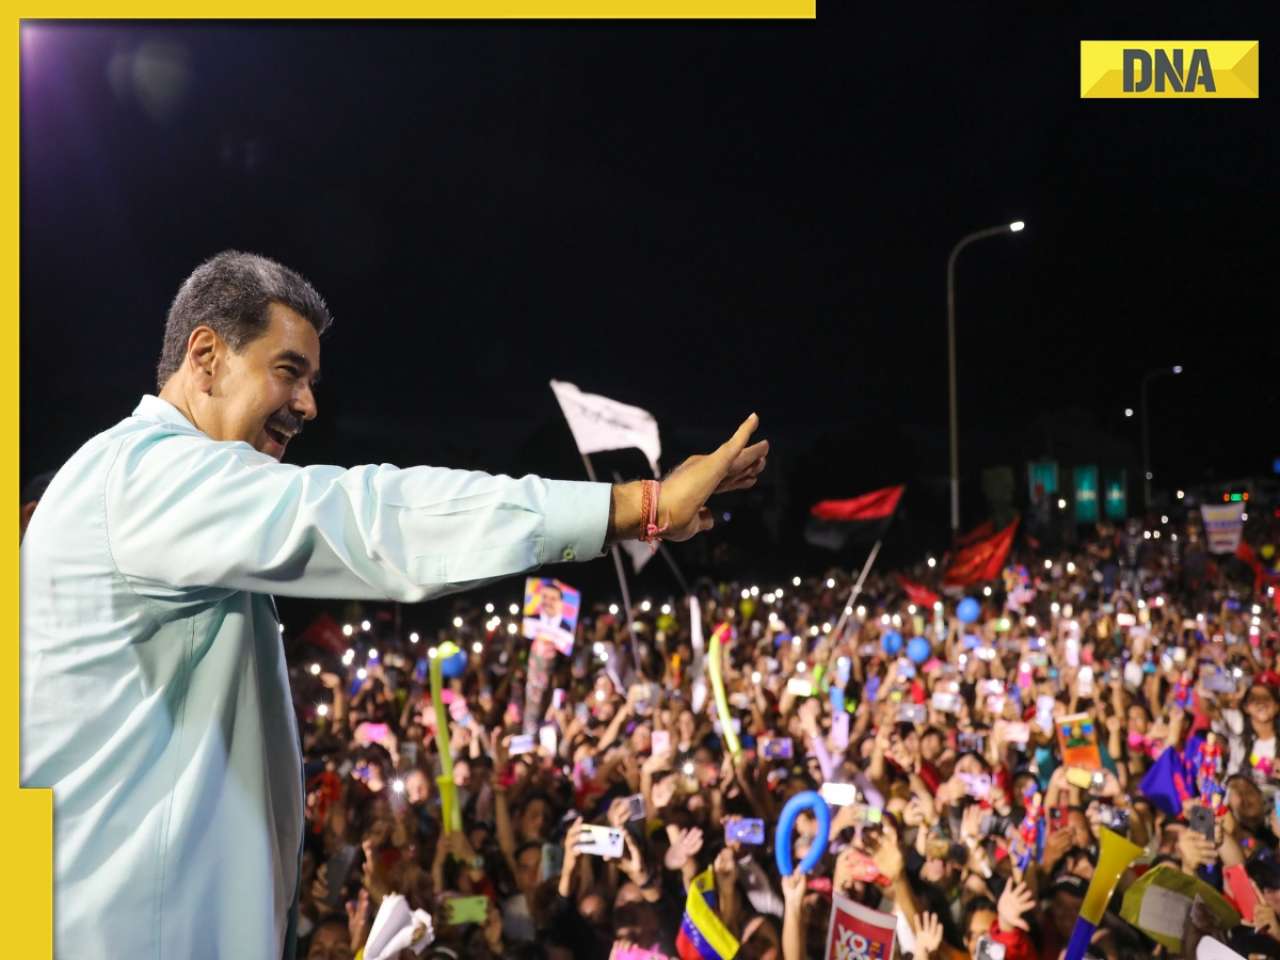 Venezuela's Nicolas Maduro wins 3rd term: Who is he and why is opposition claiming irregularities in presidential polls?